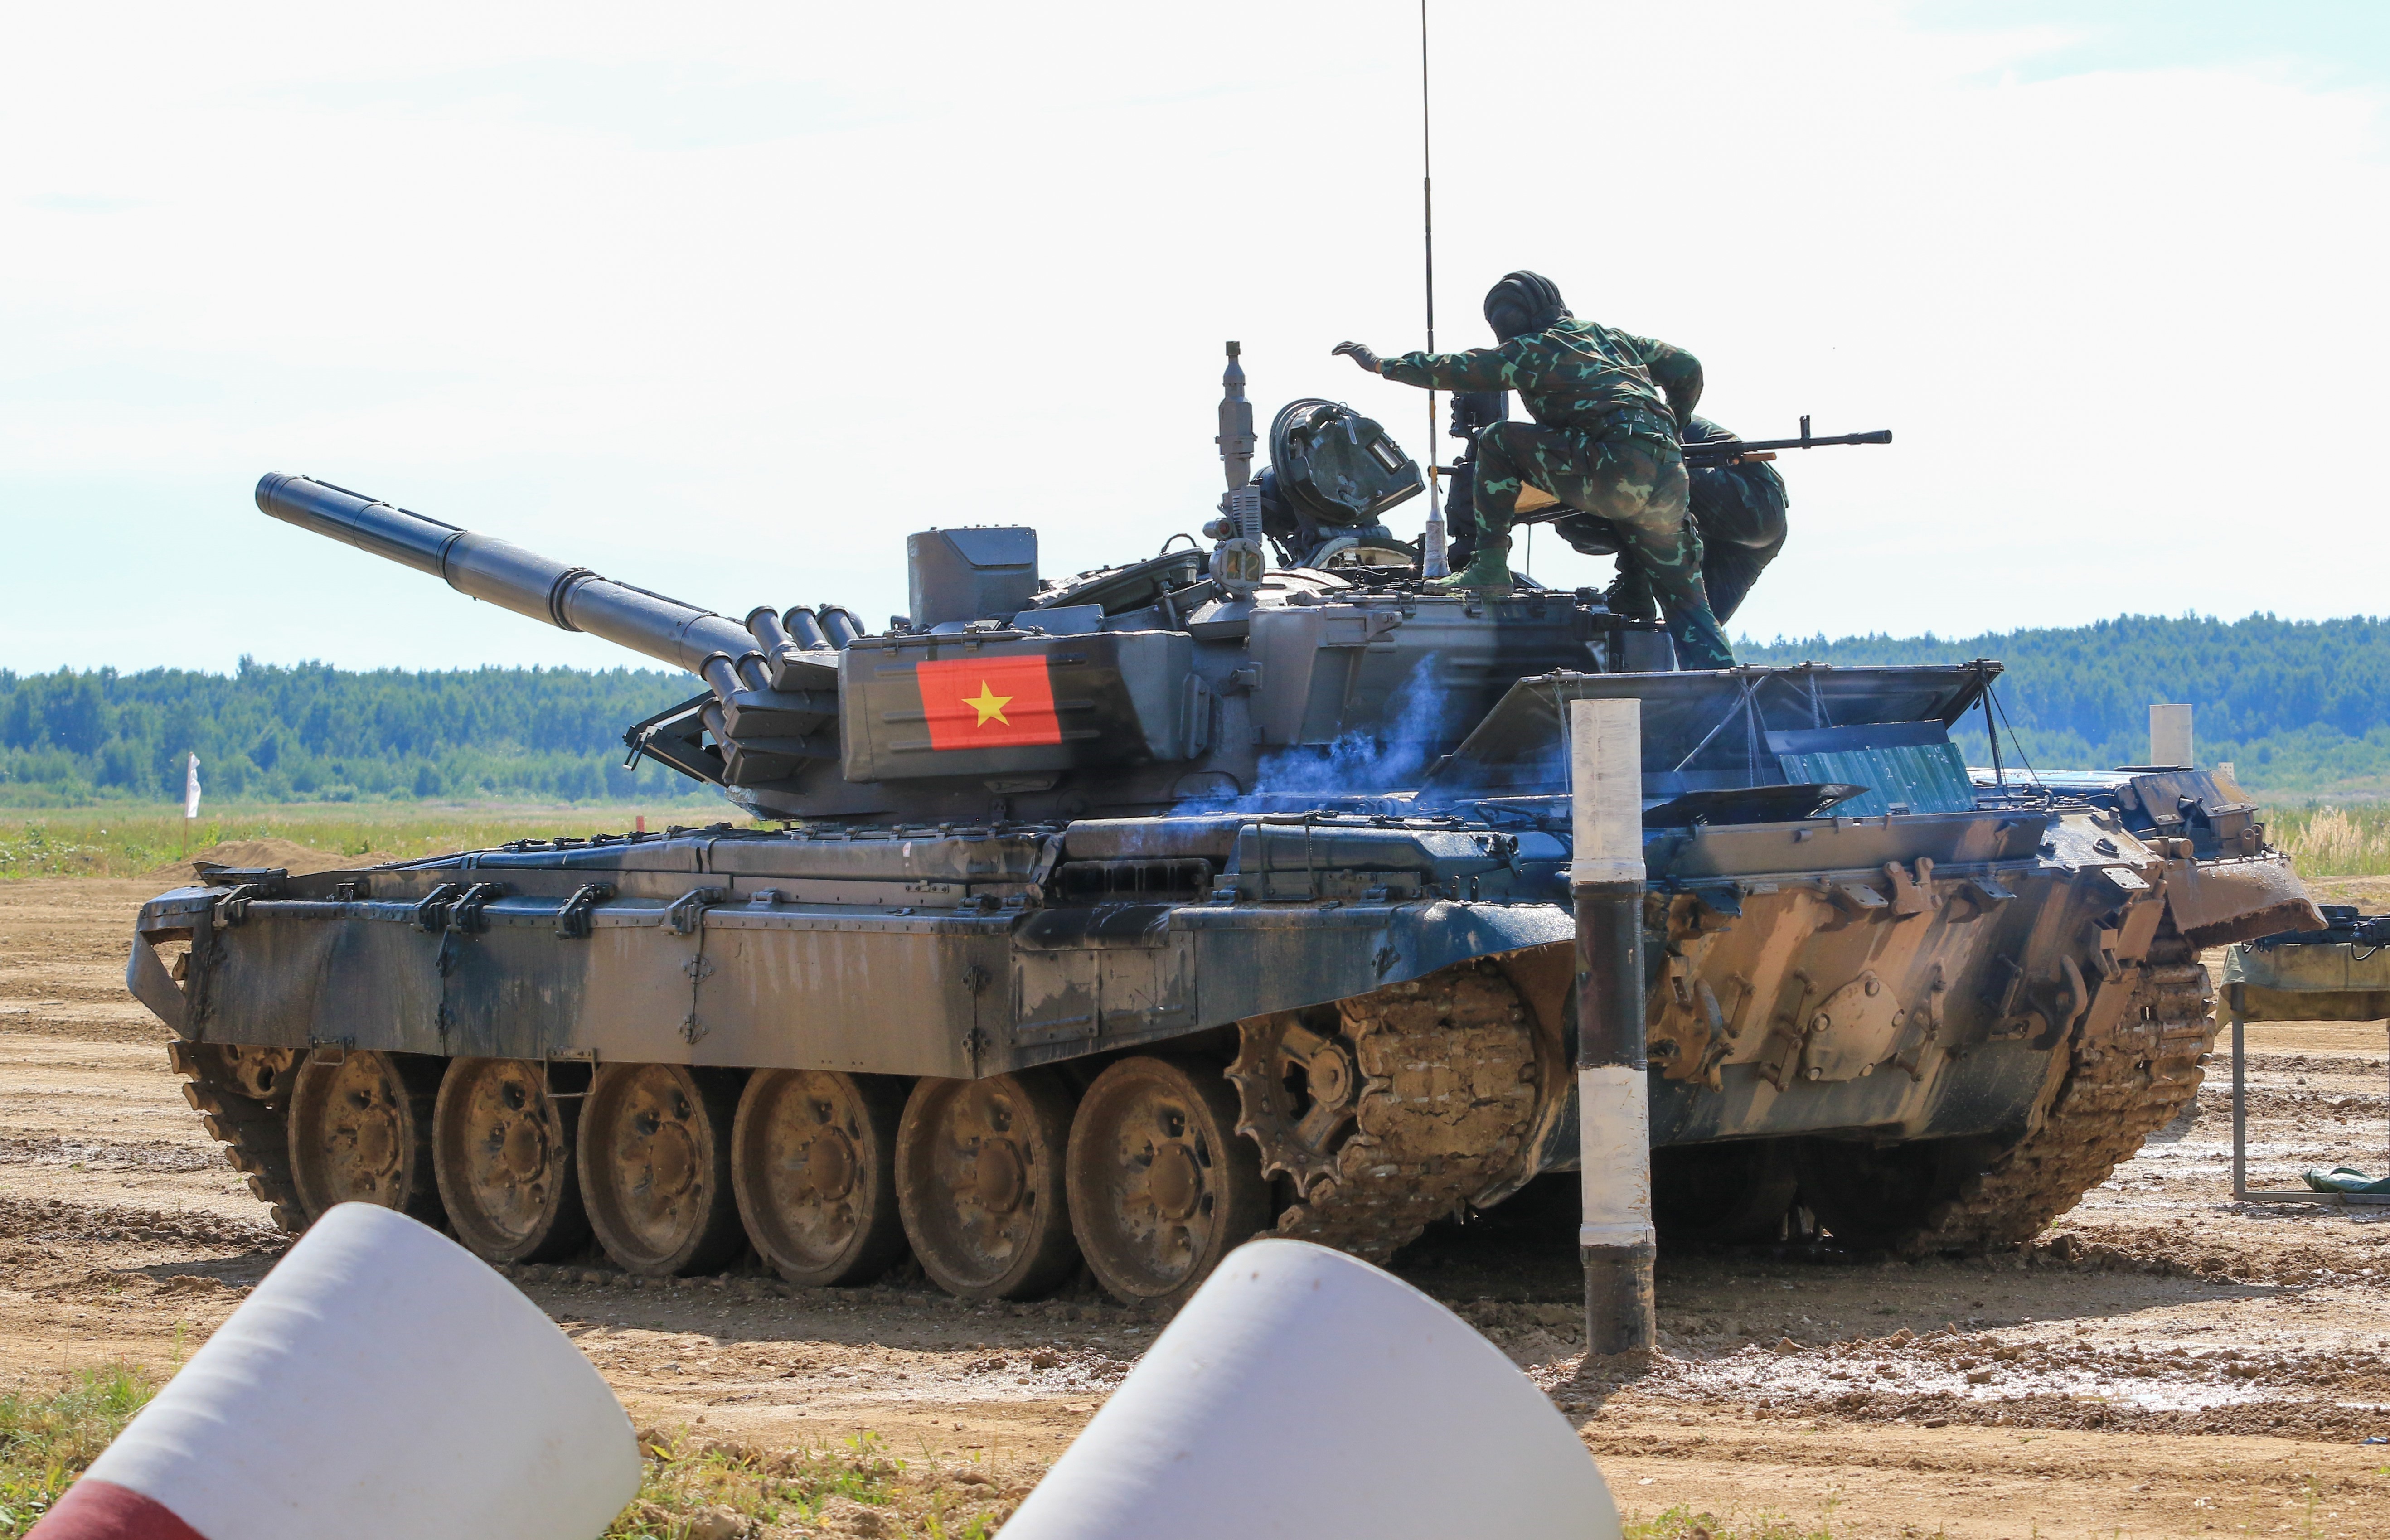 Vietnam’s tank team competes in International Army Games in Russia